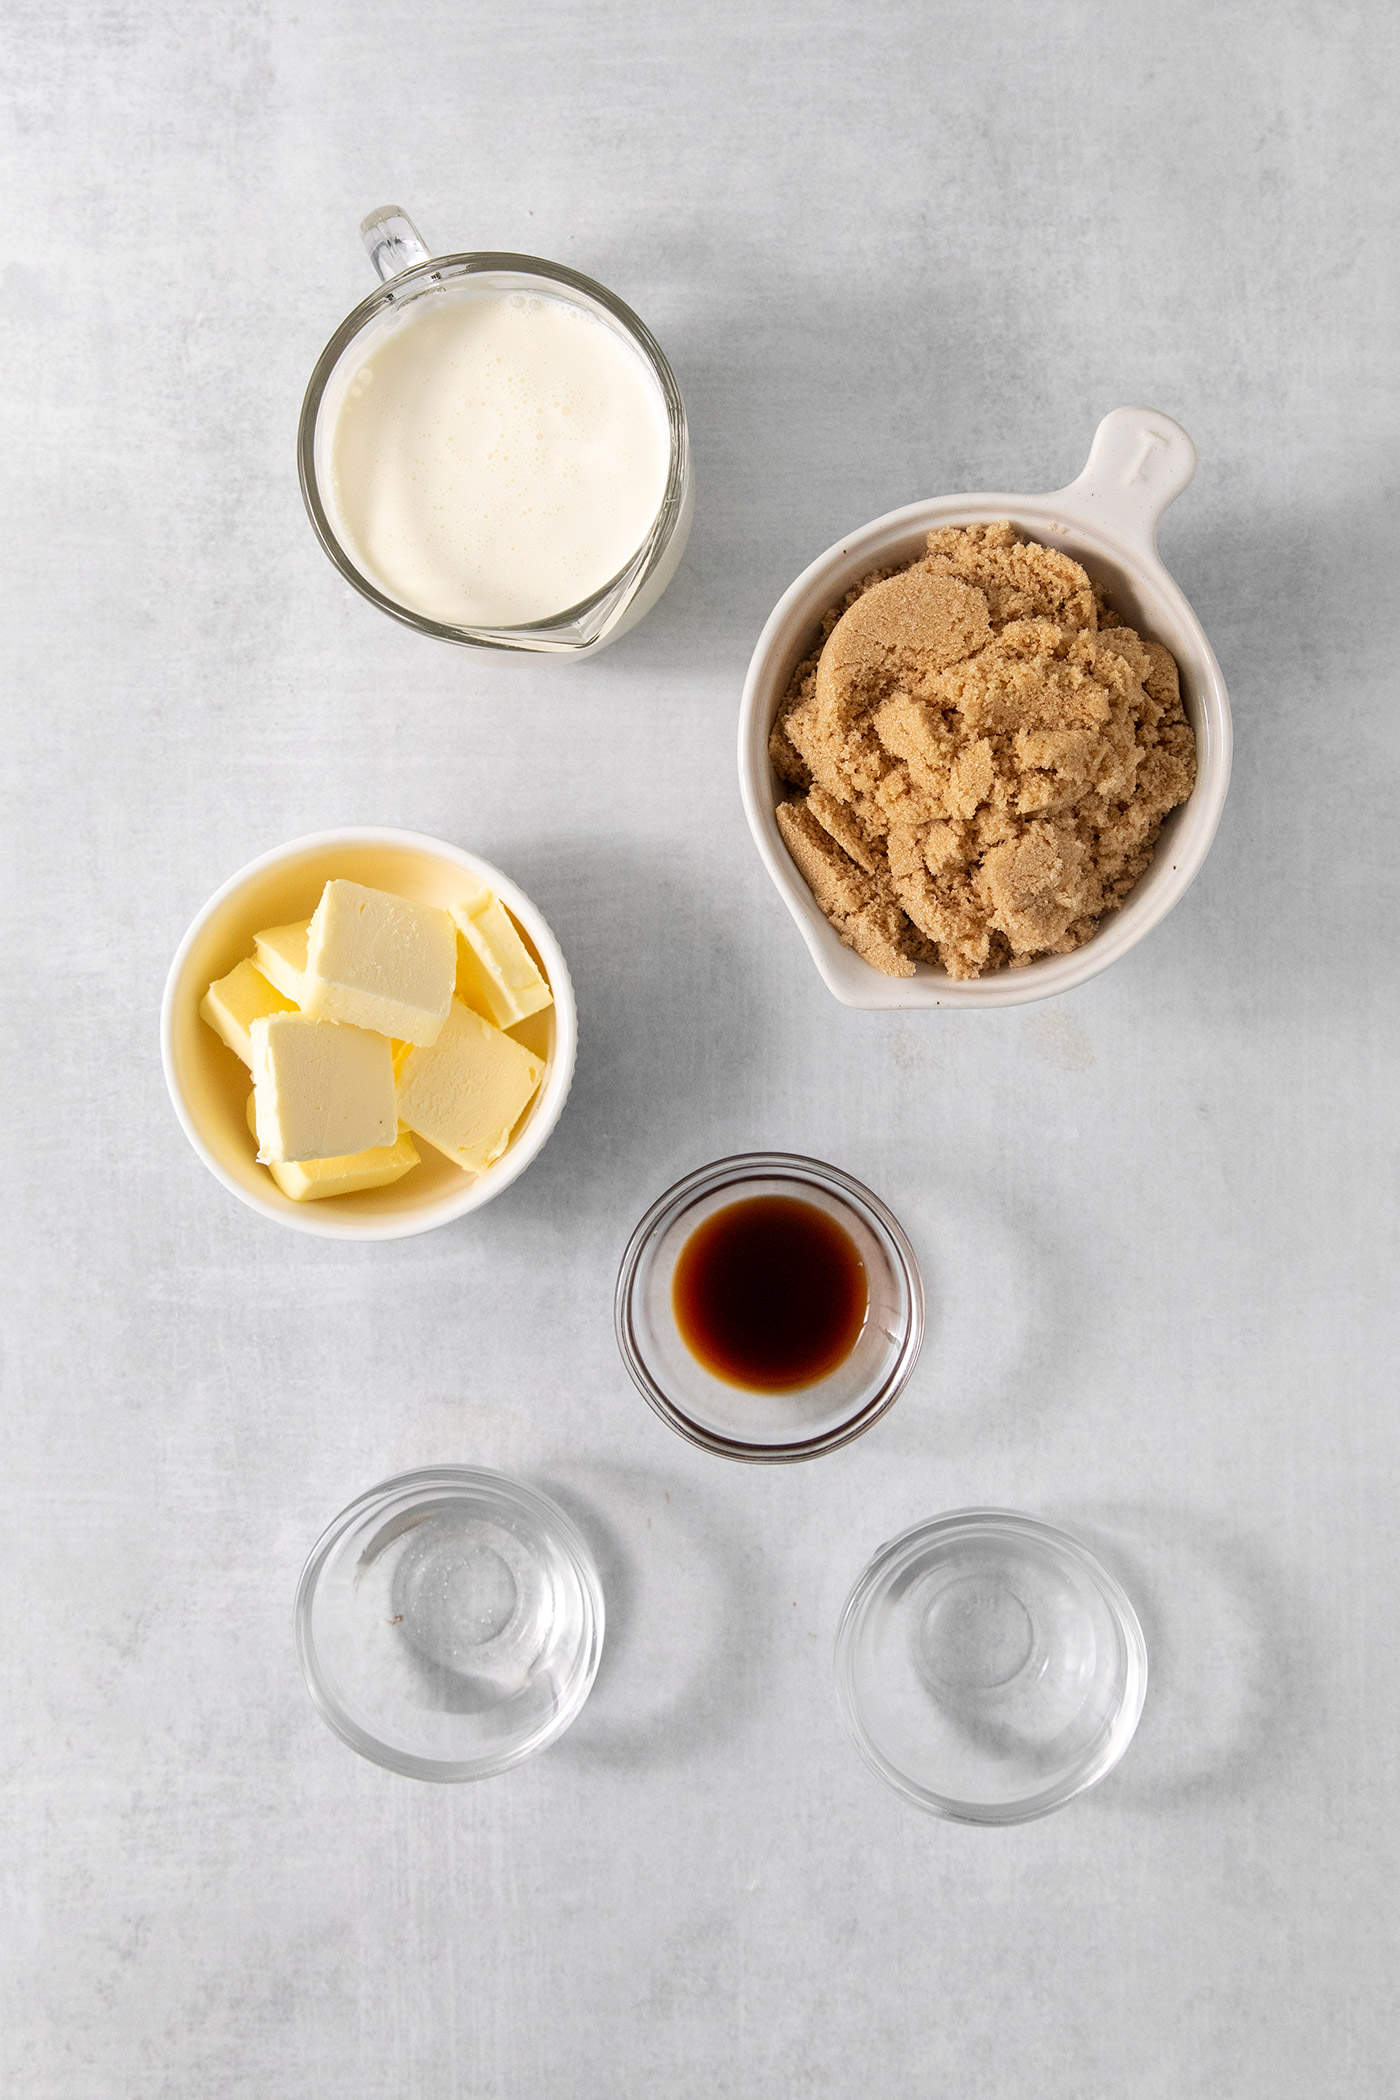 Ingredients for caramel sauce are shown portioned out in bowls: water, brown sugar, butter, vanilla, cream.